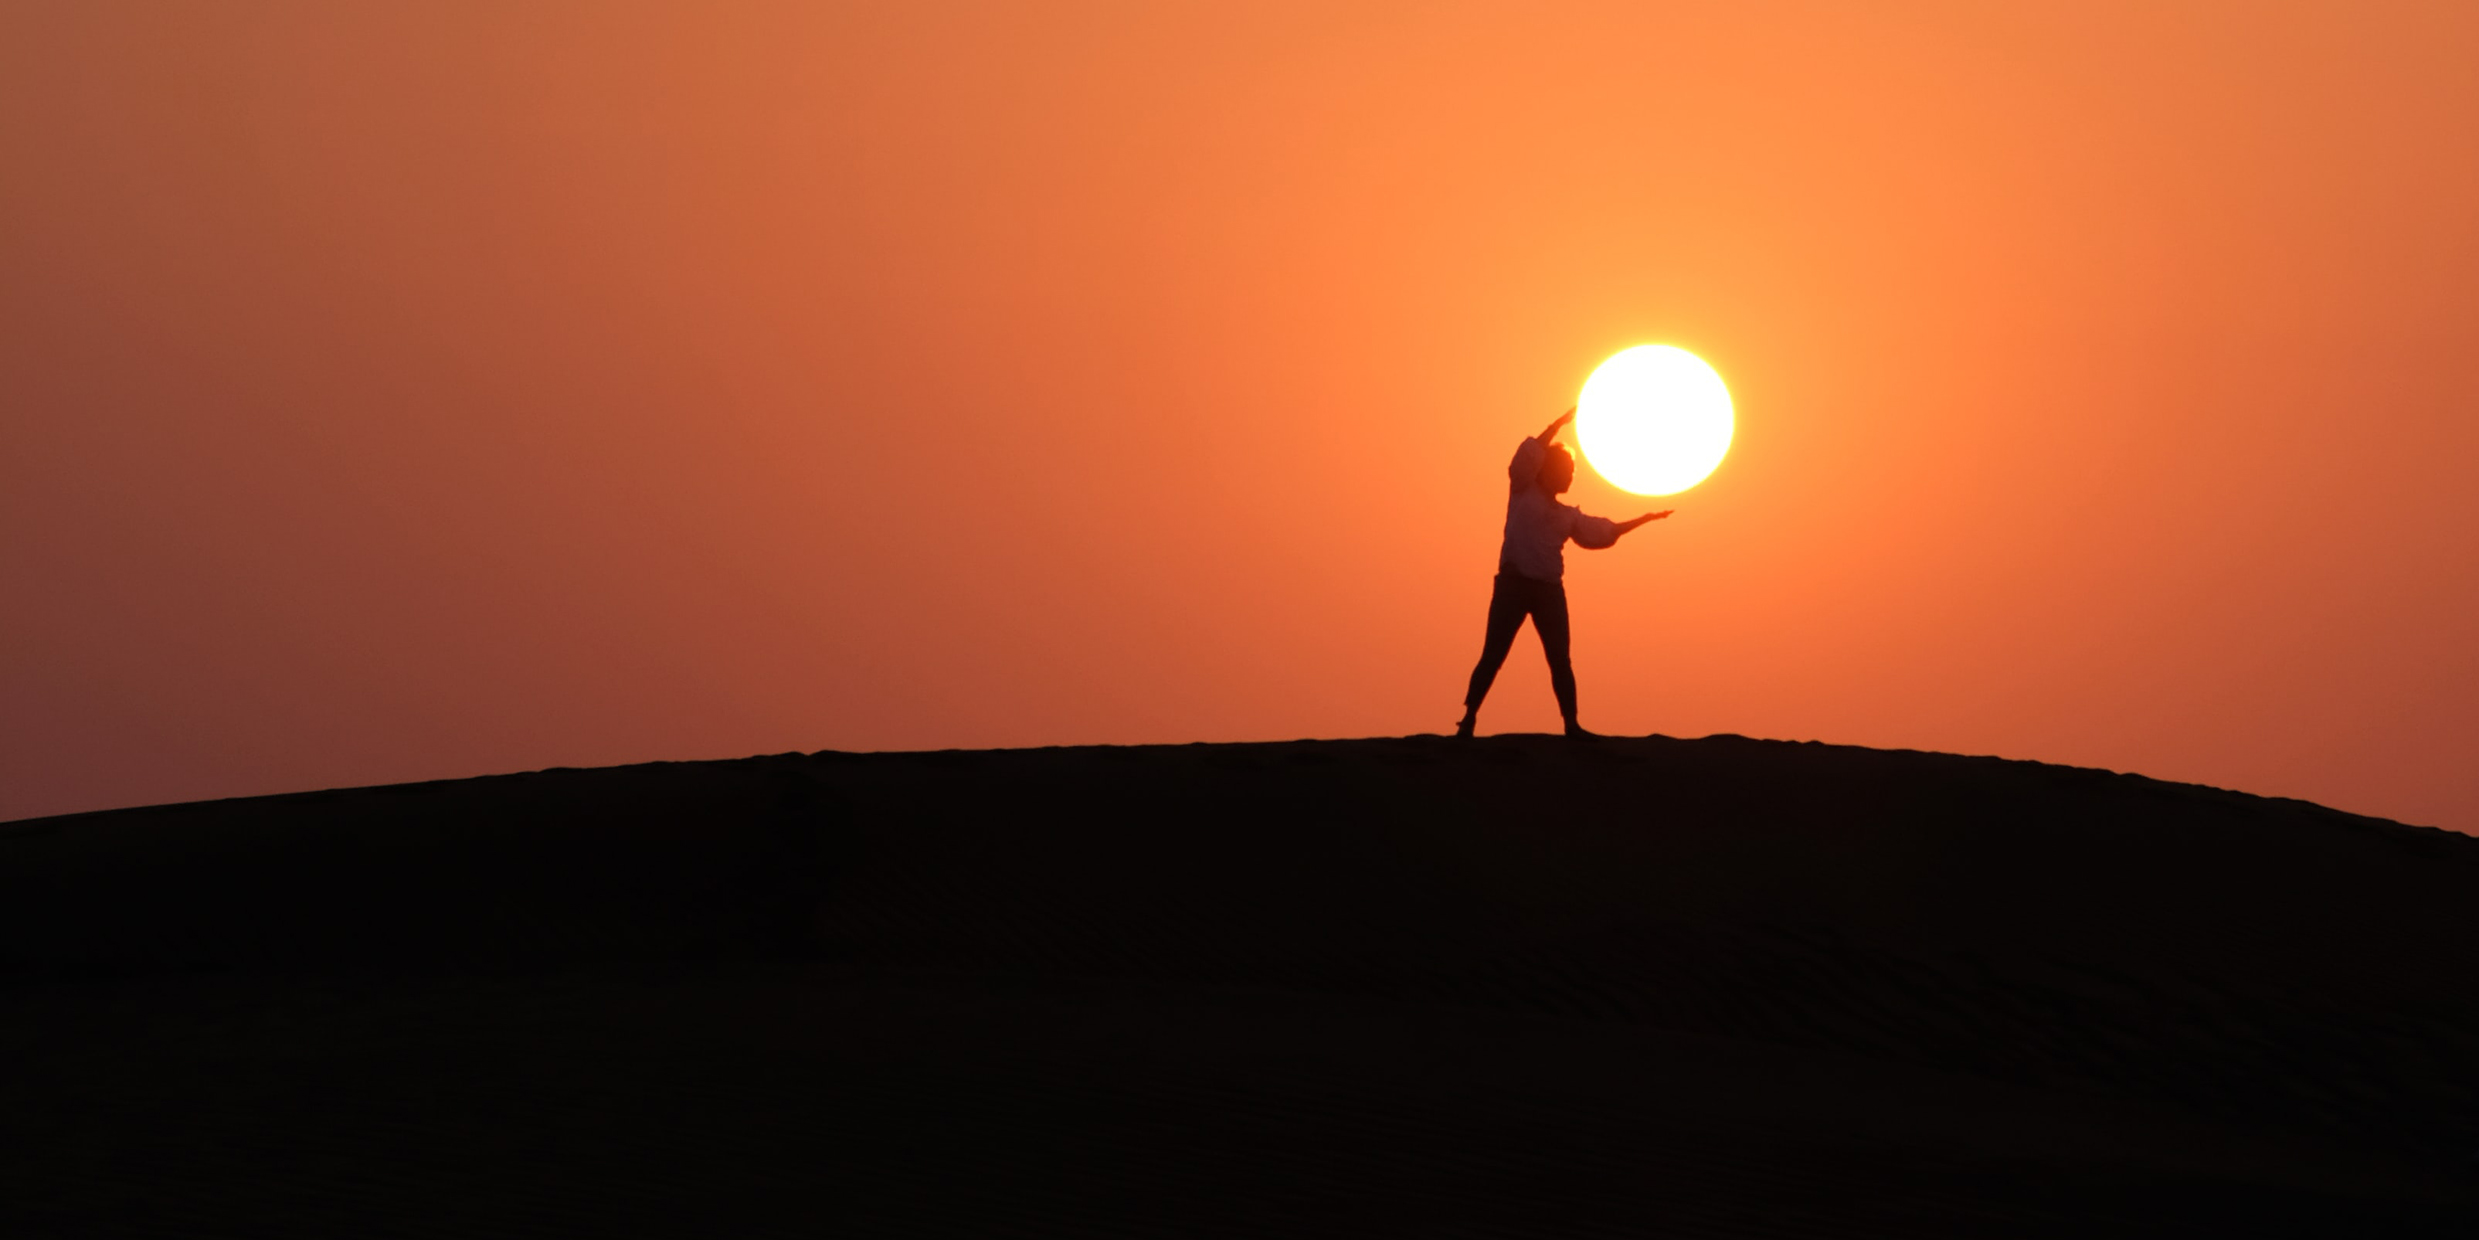 Silhouette of a person standing on the horizon positioned in such a way that they appear to be holding the sun in their hands